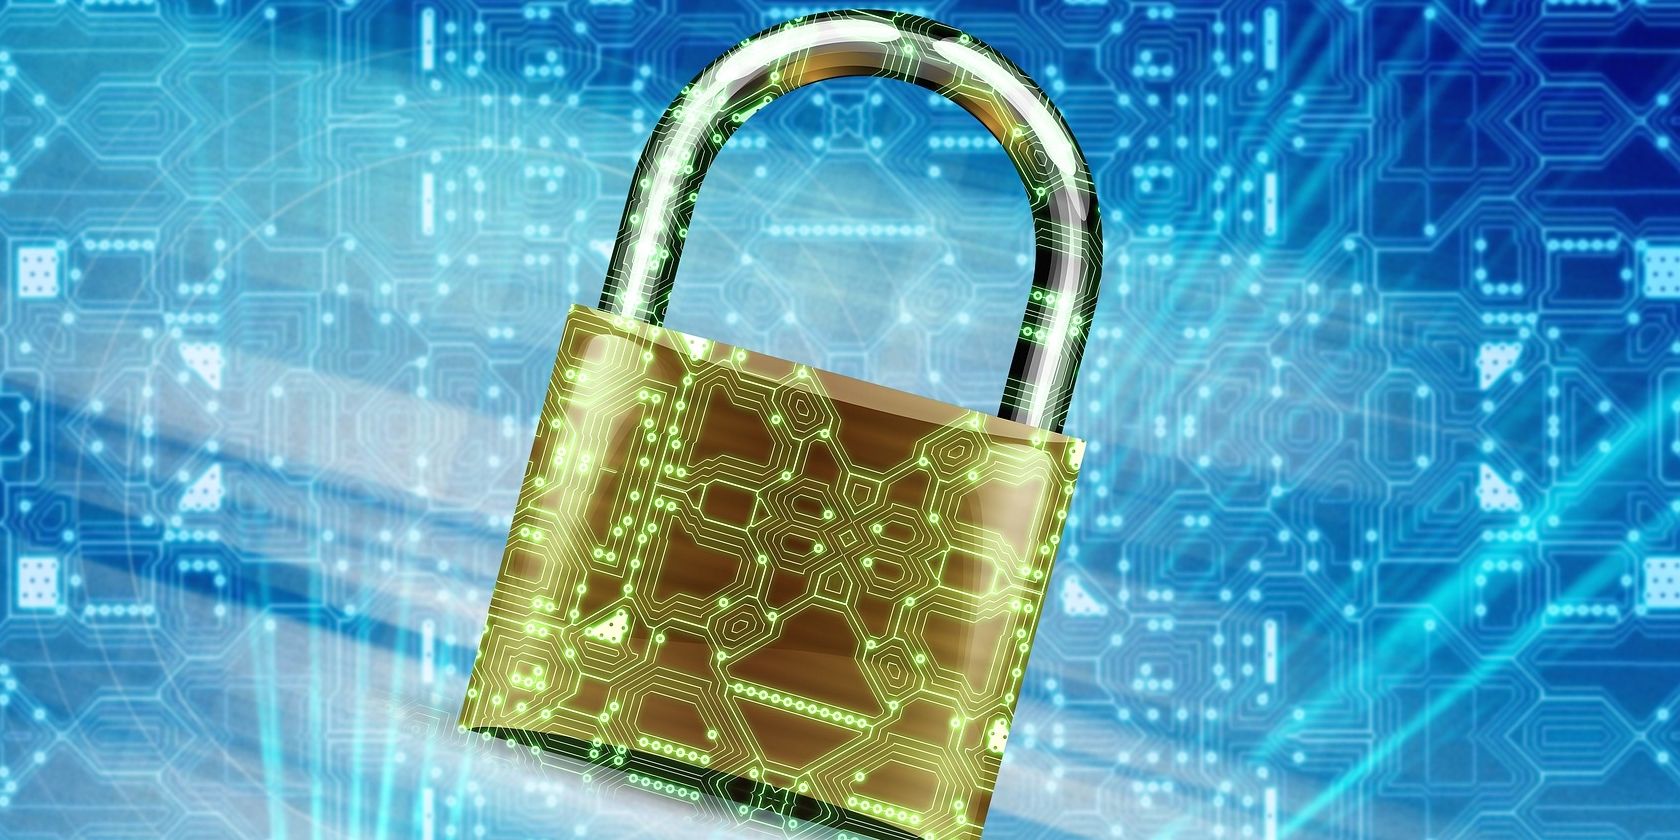 Cybersecurity padlock with blue background.